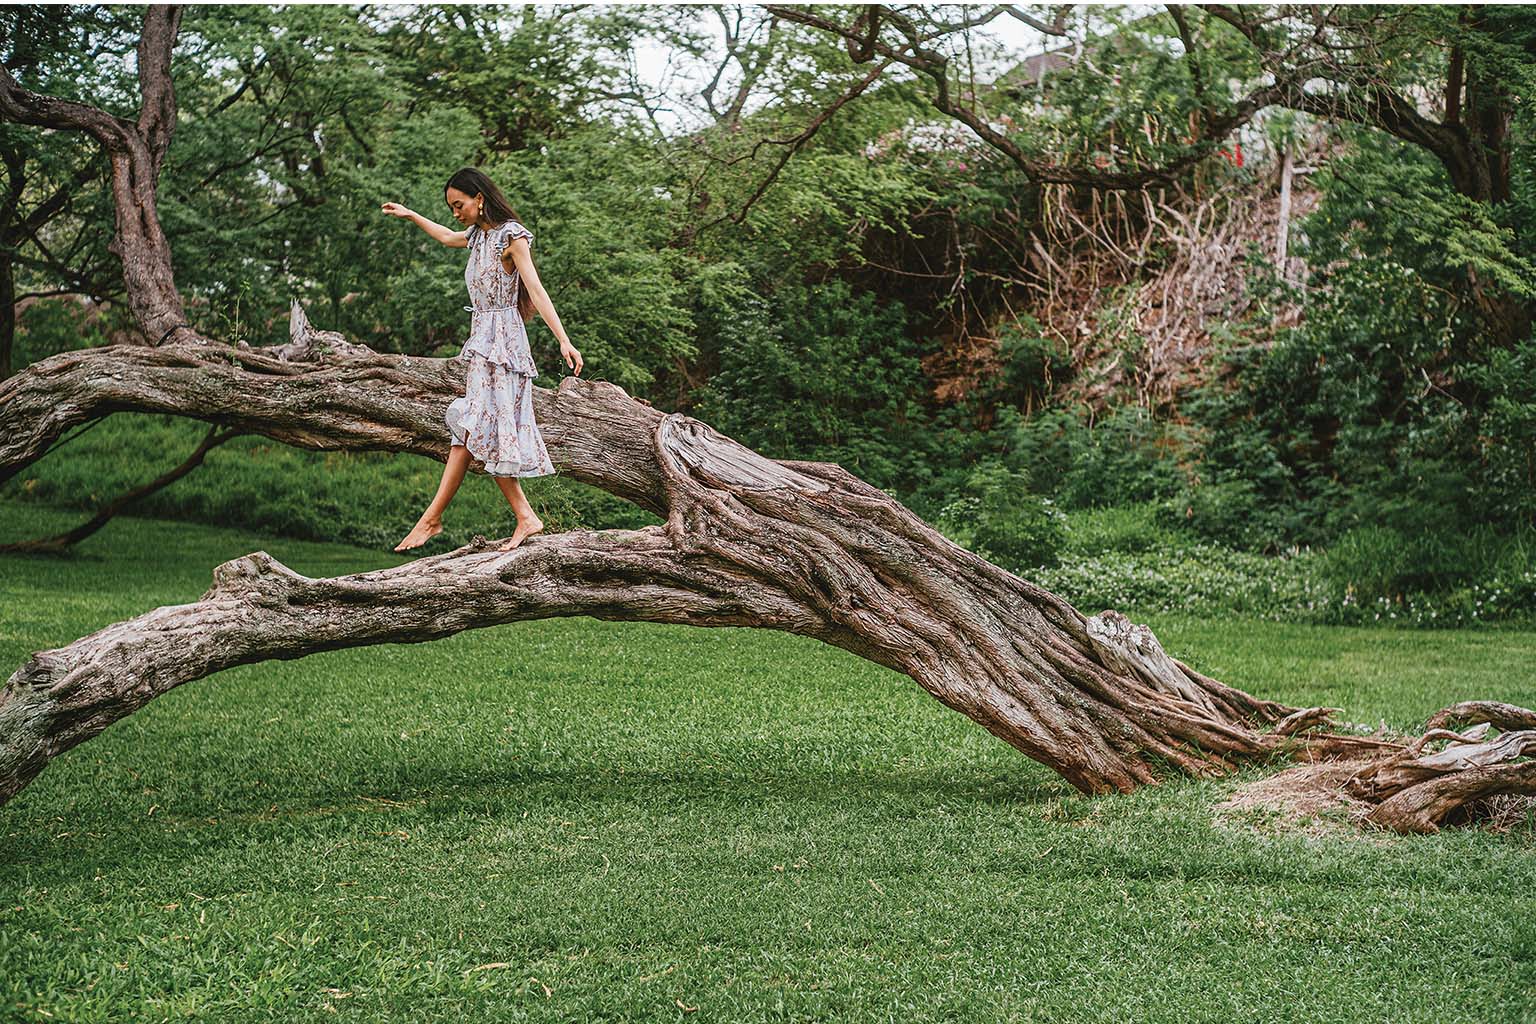 A person in a white floral dress walking on a large fallen tree trunk in a lush green park setting with trees and foliage in the background.